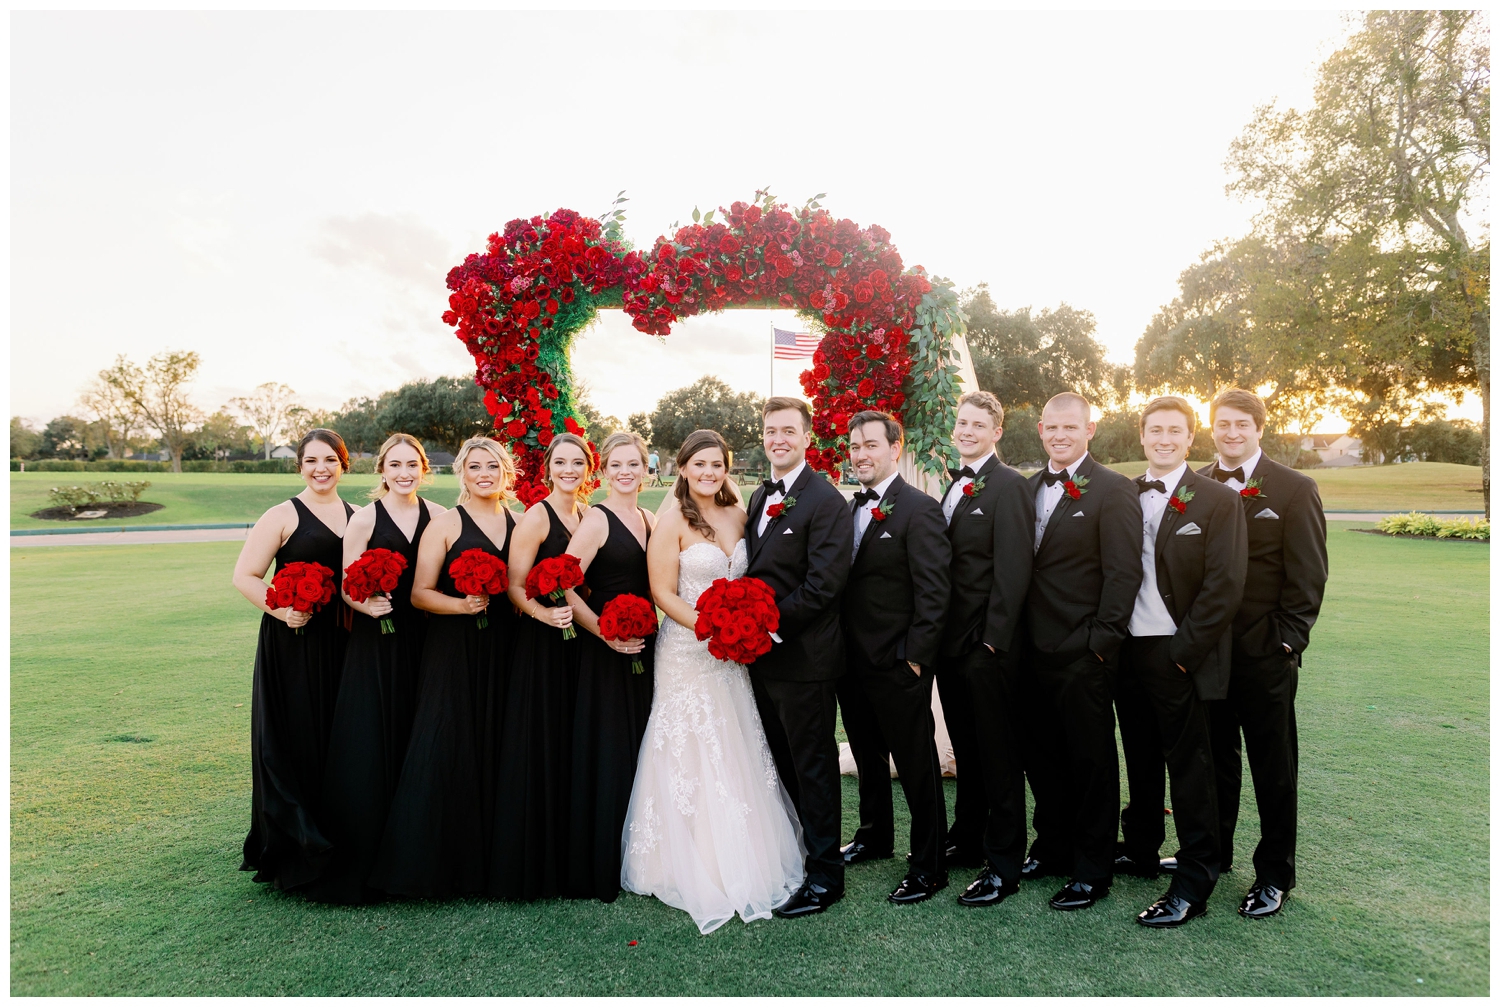 bridal party in front of red rose arch outdoors at Sugar Creek Country Club wedding